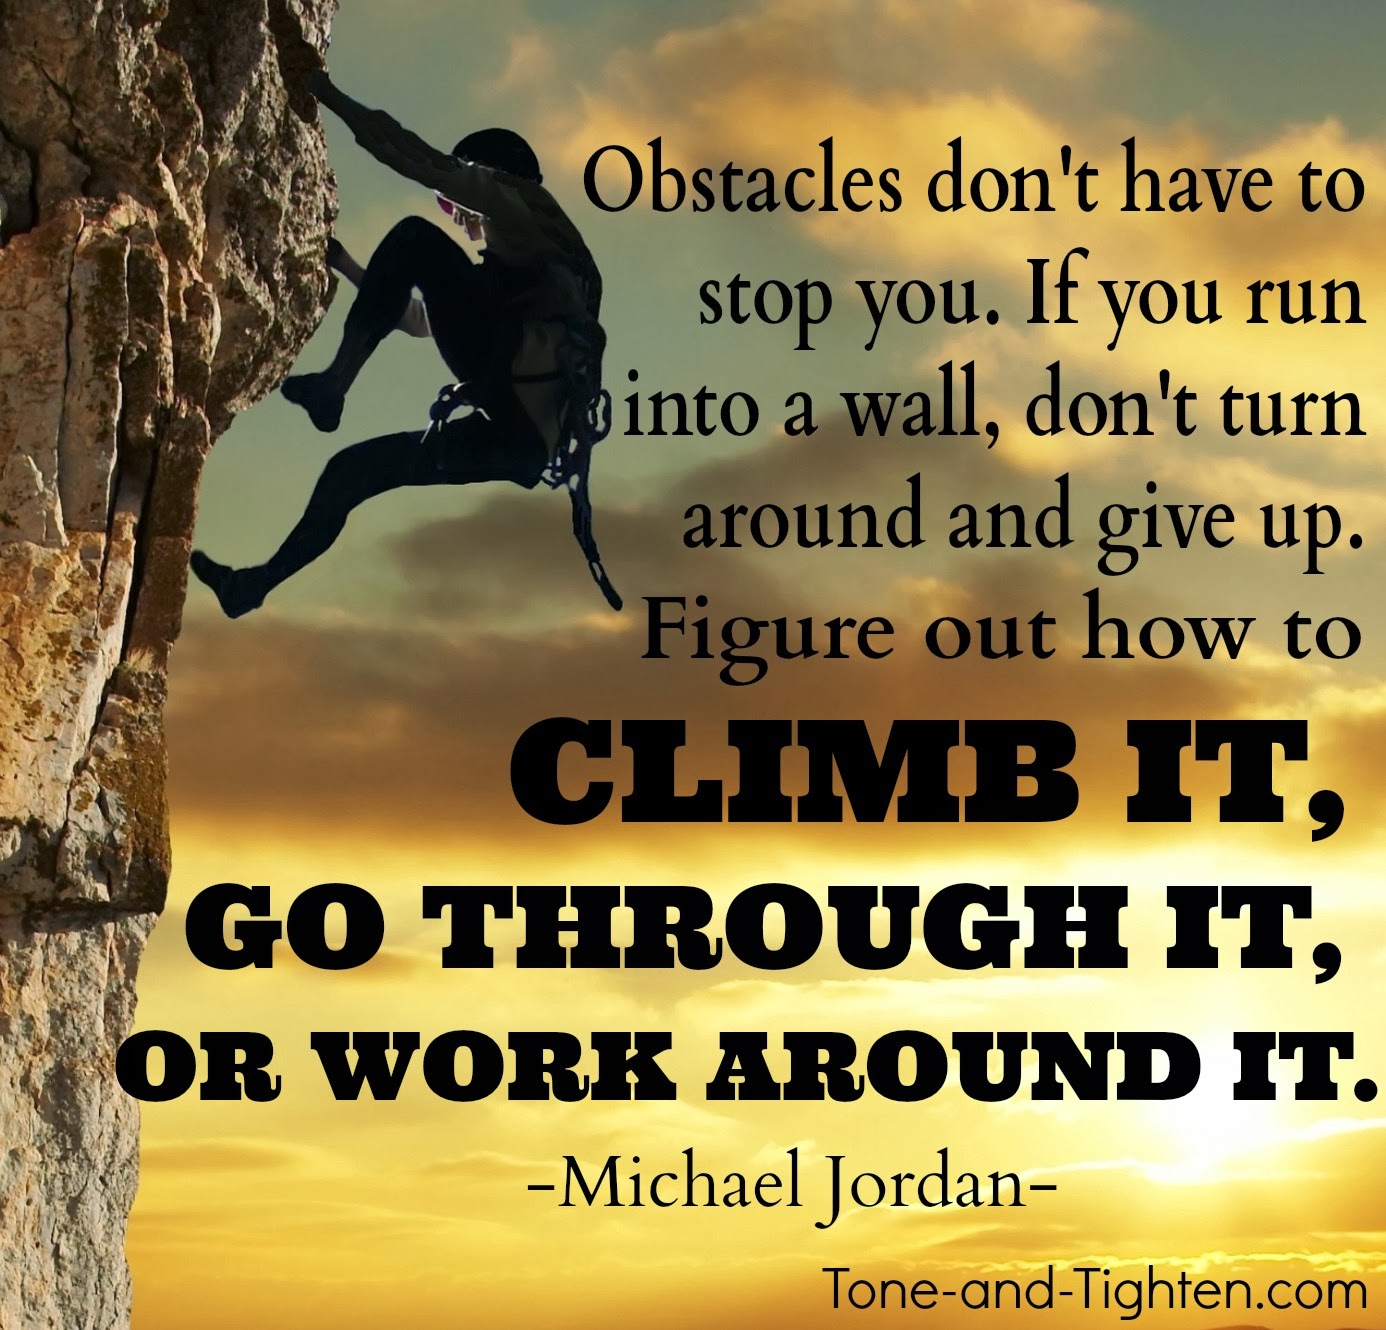 Obstacles Quotes Inspirational. QuotesGram